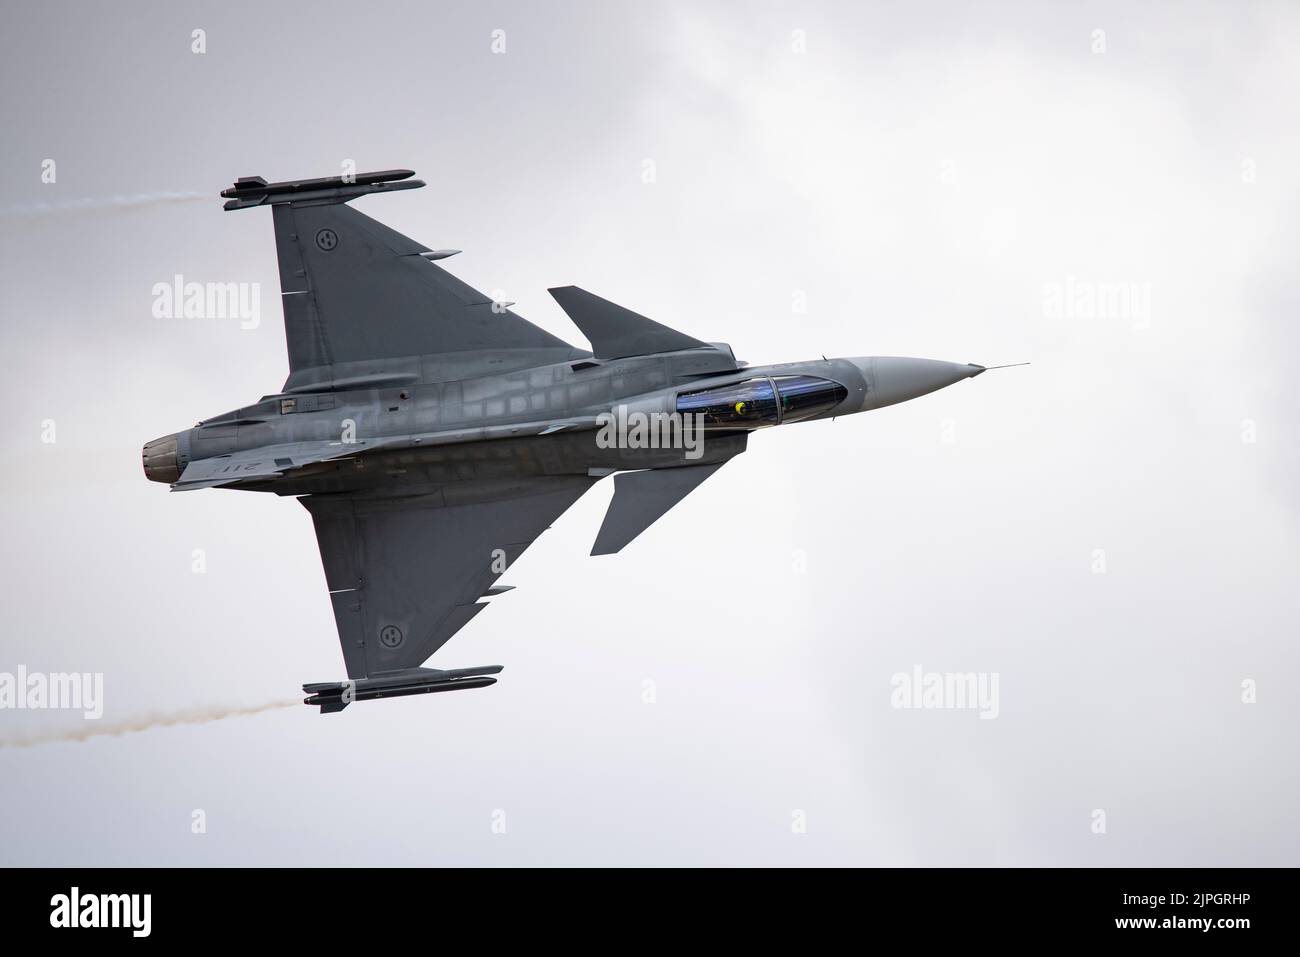 A superb flying display by the Hungarian Air Force demonstrates the airborne agility of the Swedish Gripen JAS 39C multirole fighter jet at the RIAT Stock Photo